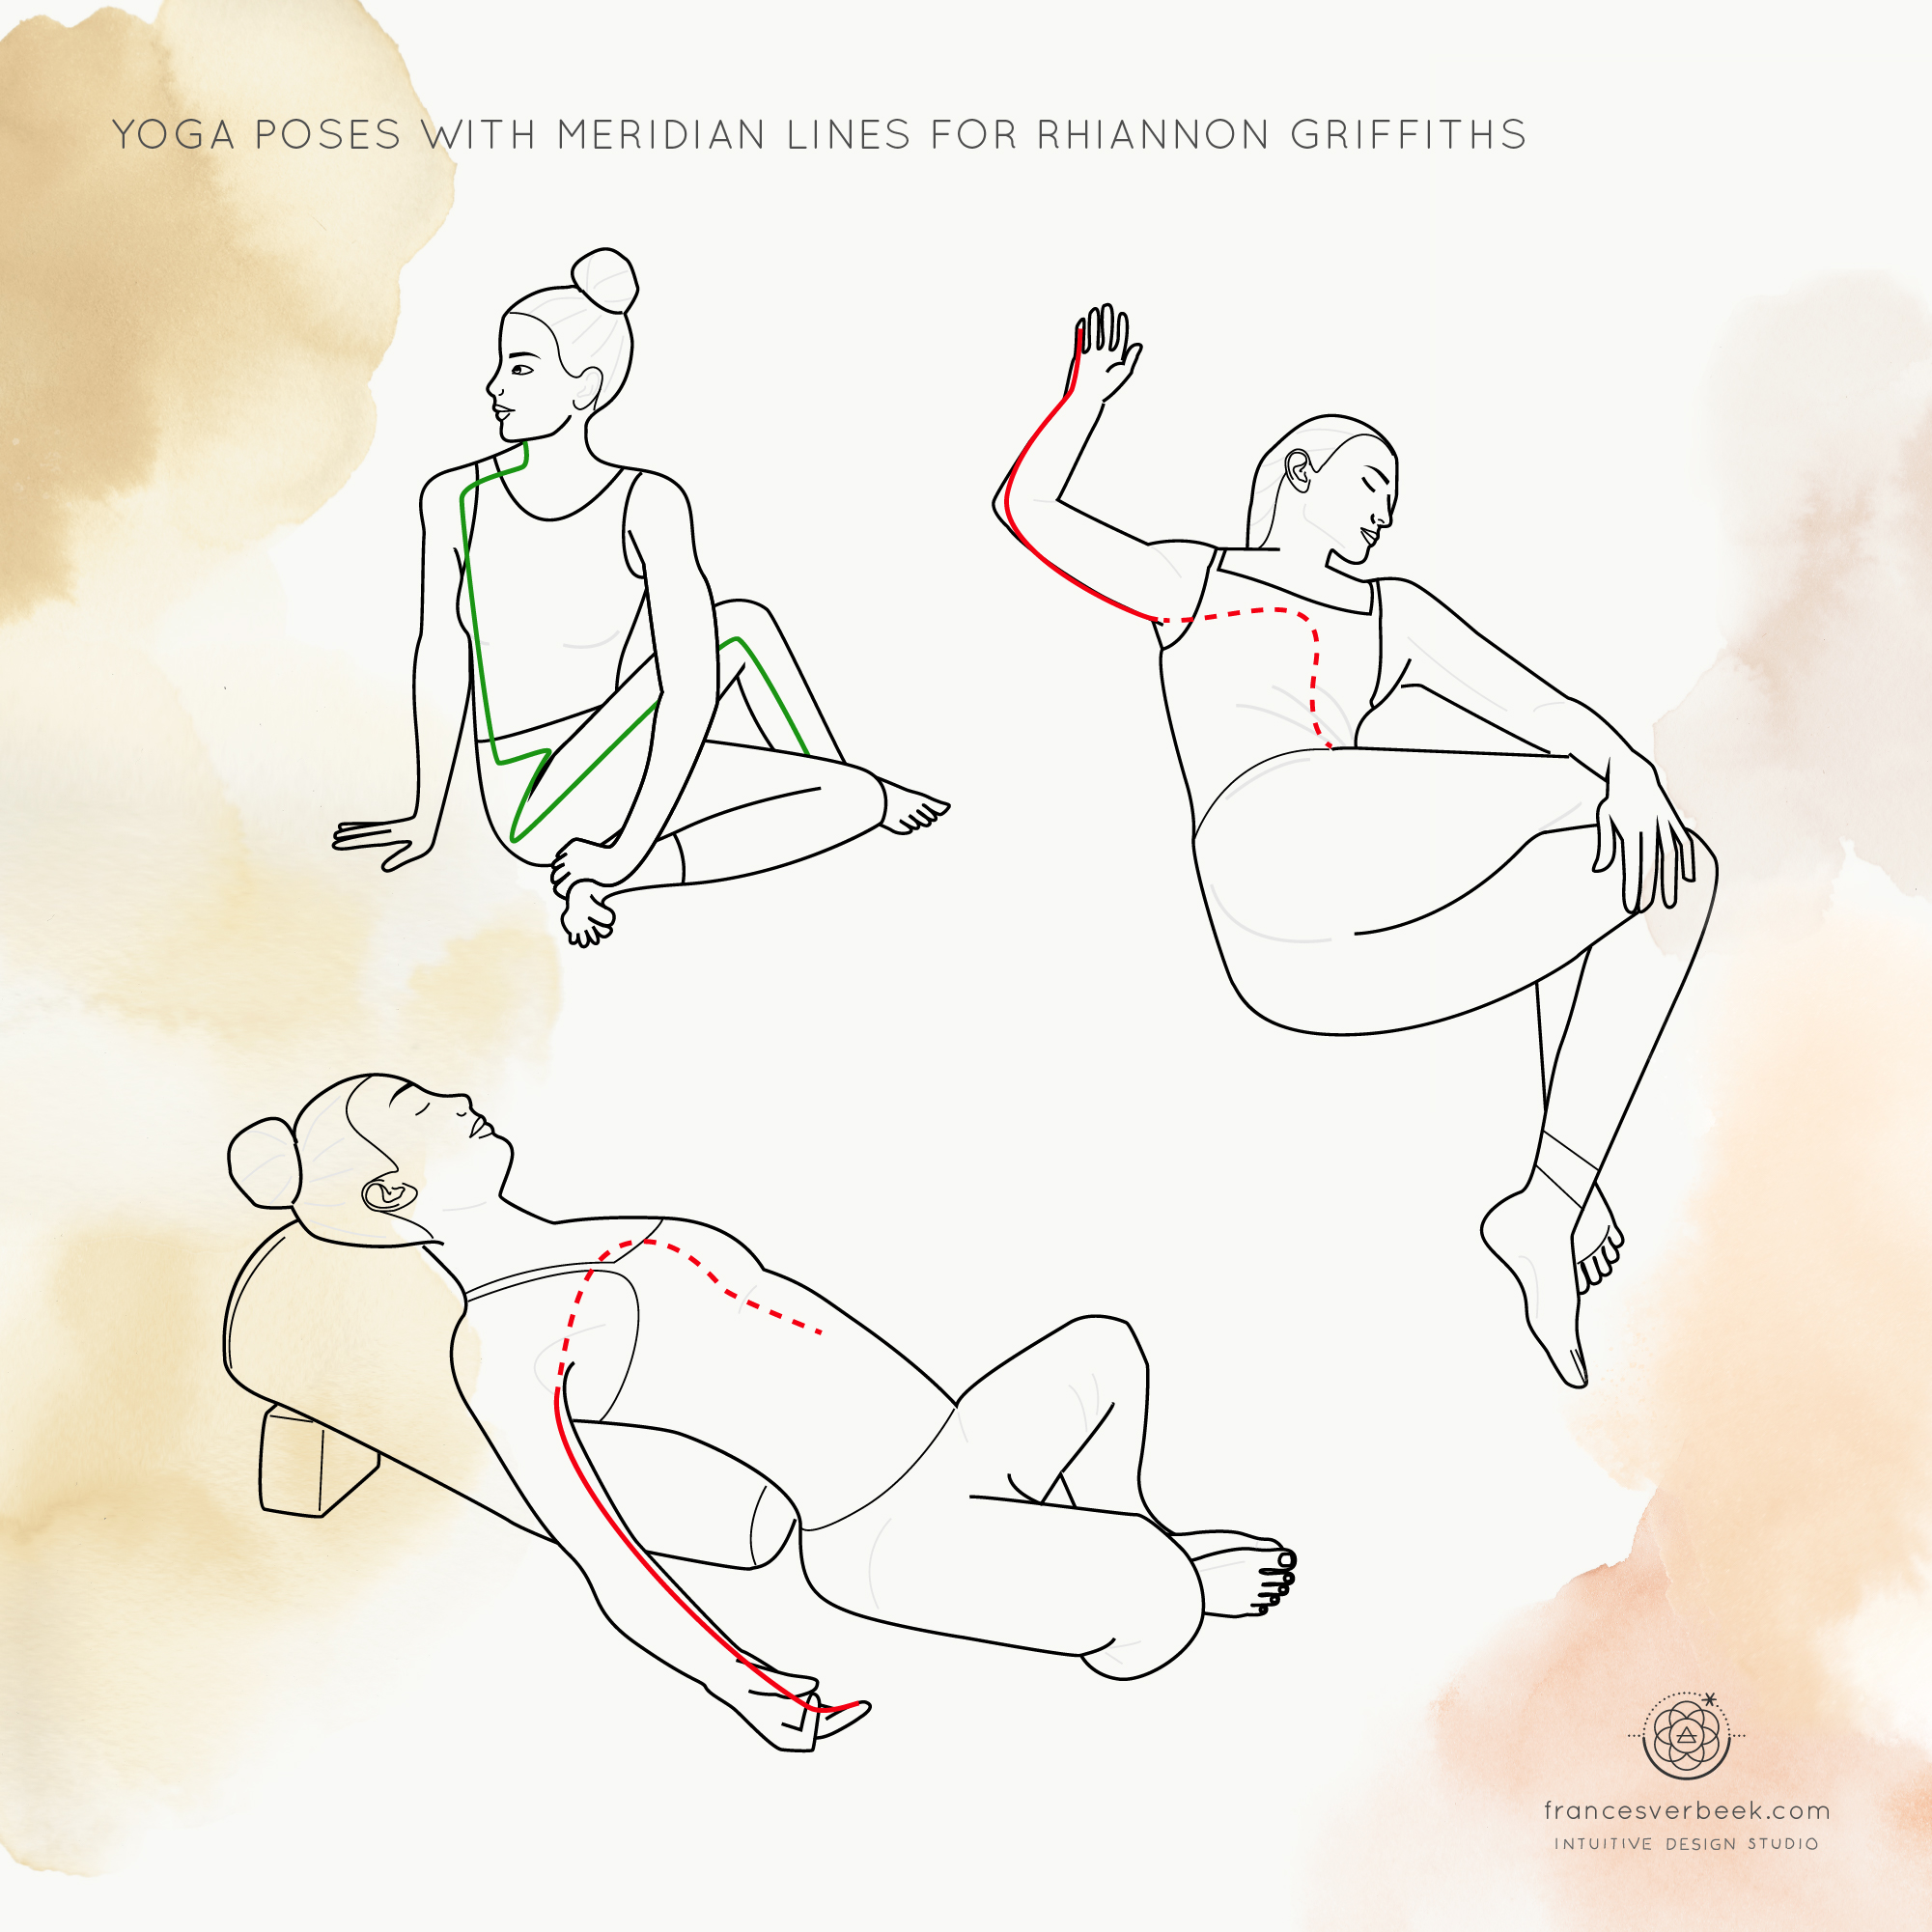 Yoga poses with meridian lines illustration for Rhiannon Griffiths by Frances Verbeek